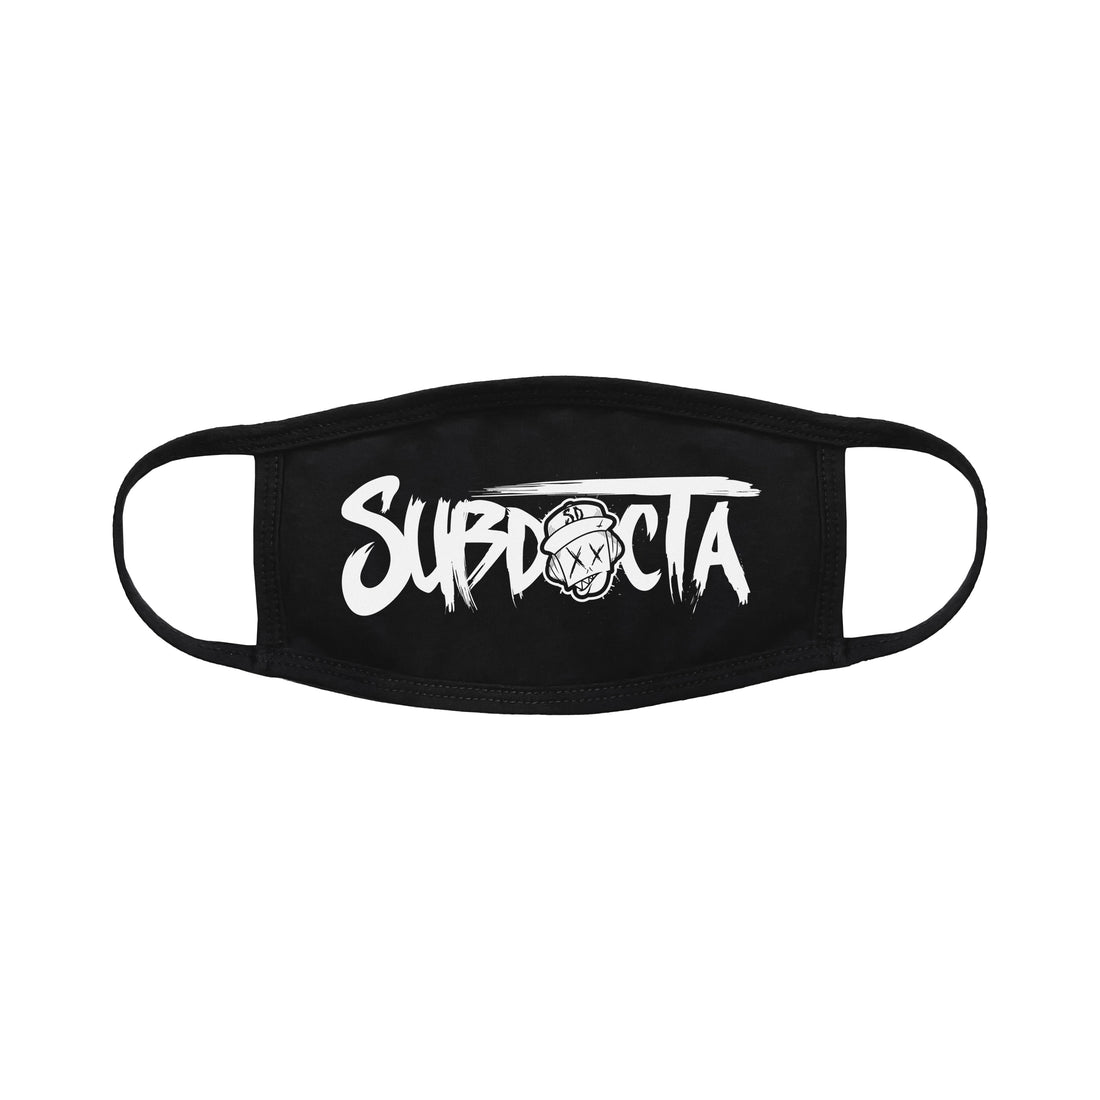 SubDocta - Gritty V2 - Face Mask